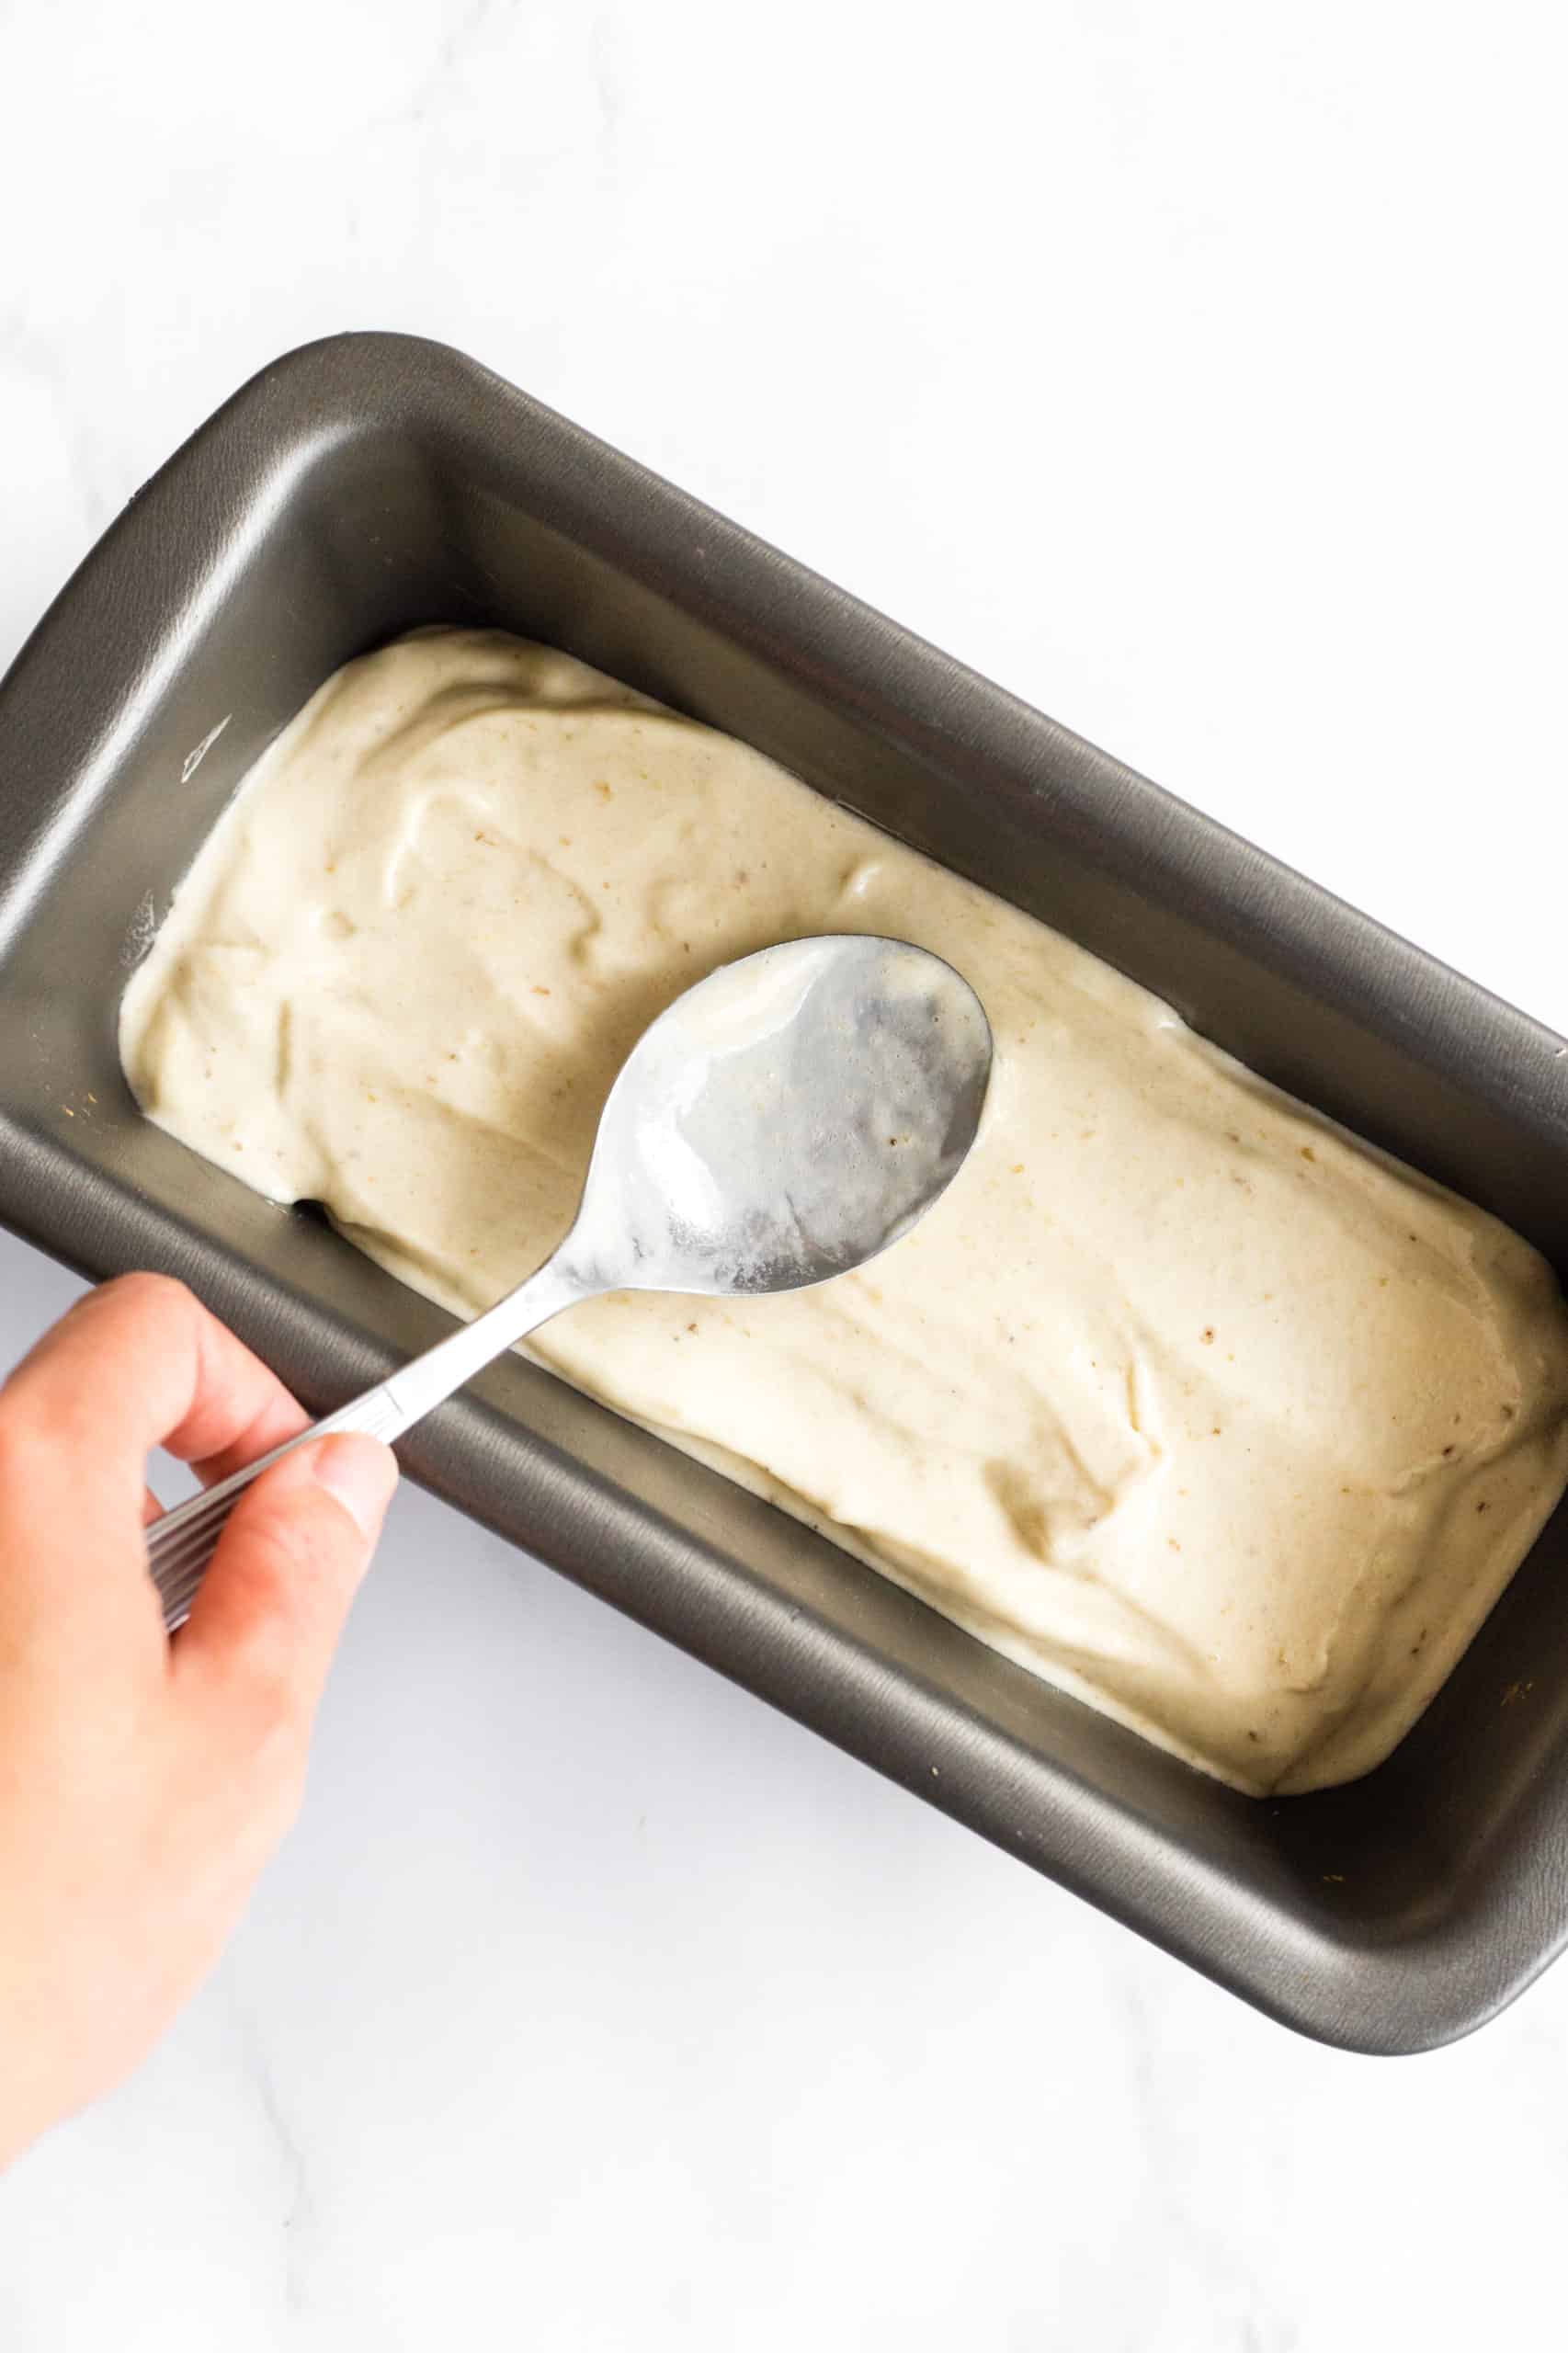 Using a spoon to spread out no-churn banana ice cream in a loaf pan to be frozen.